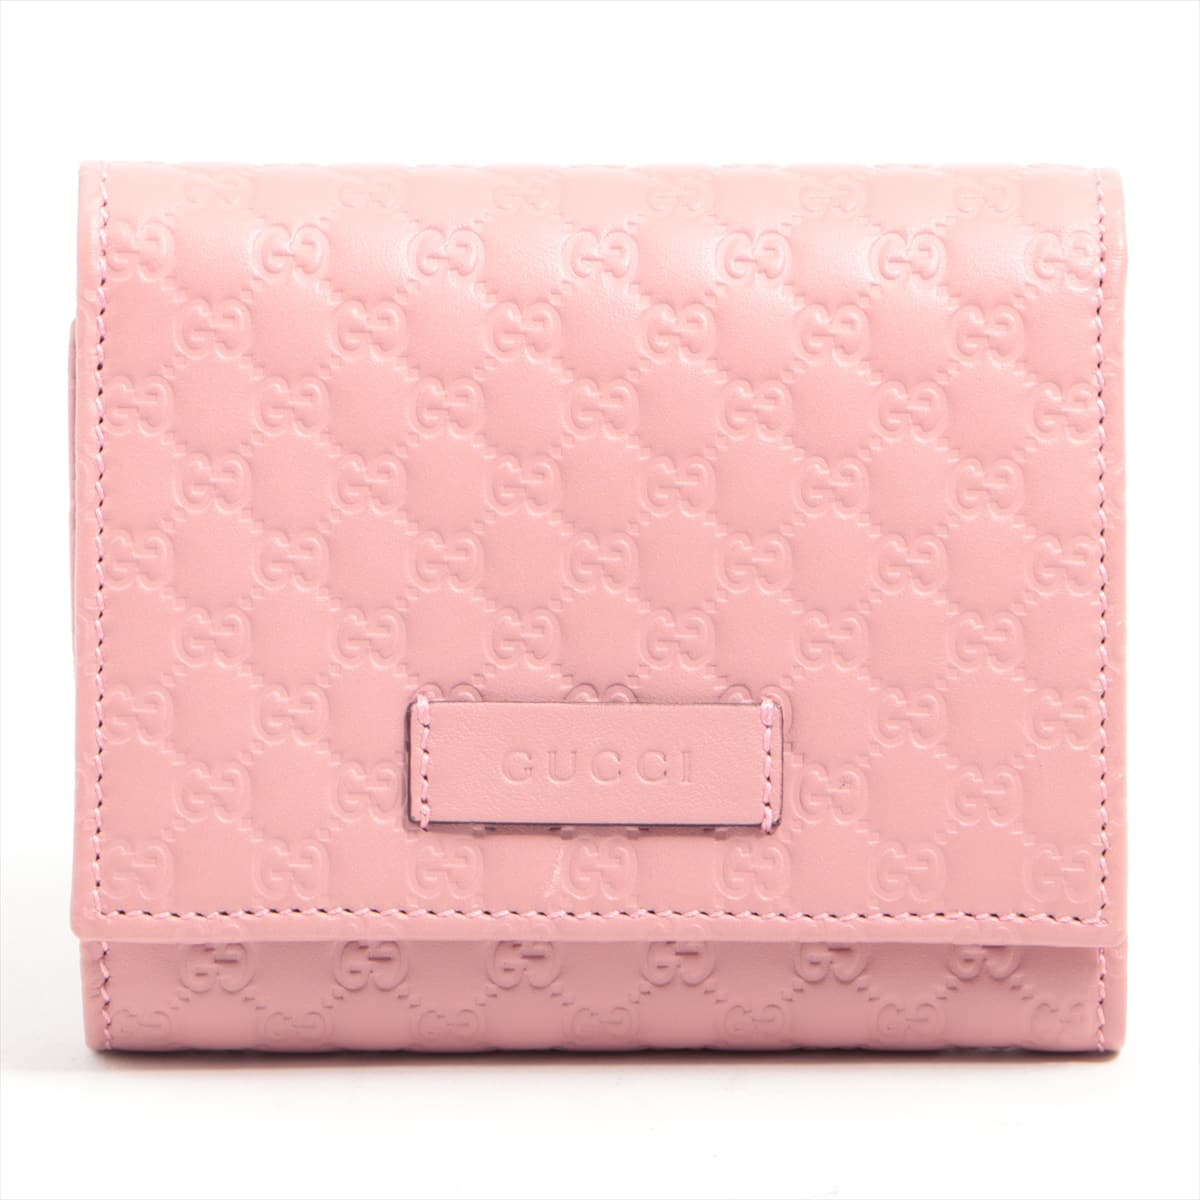 Gucci Micro Guccissima 510317 Leather Wallet Pink